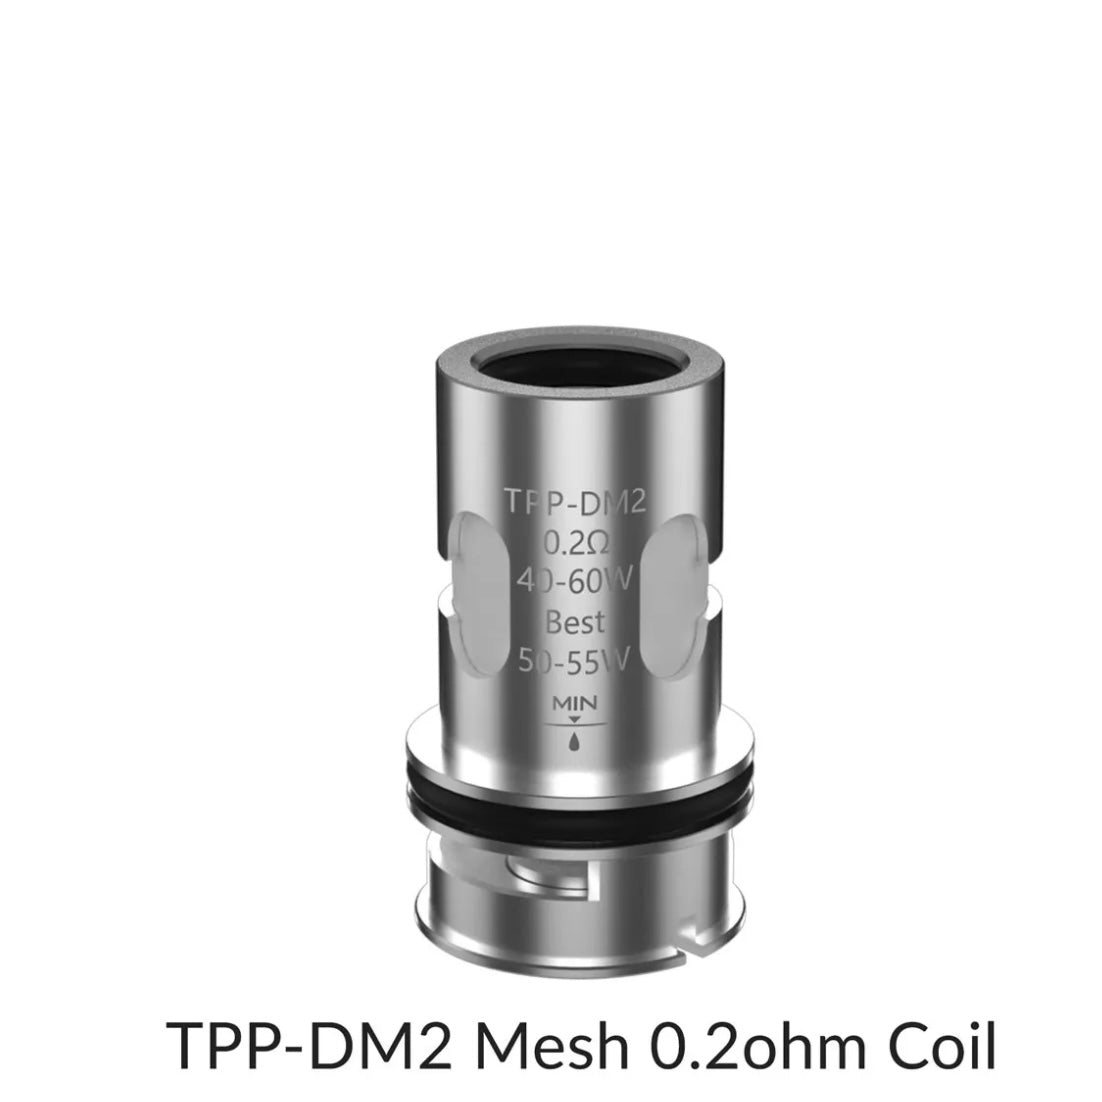 VooPoo - TPP Tank/Pod Replacement Coil Pack